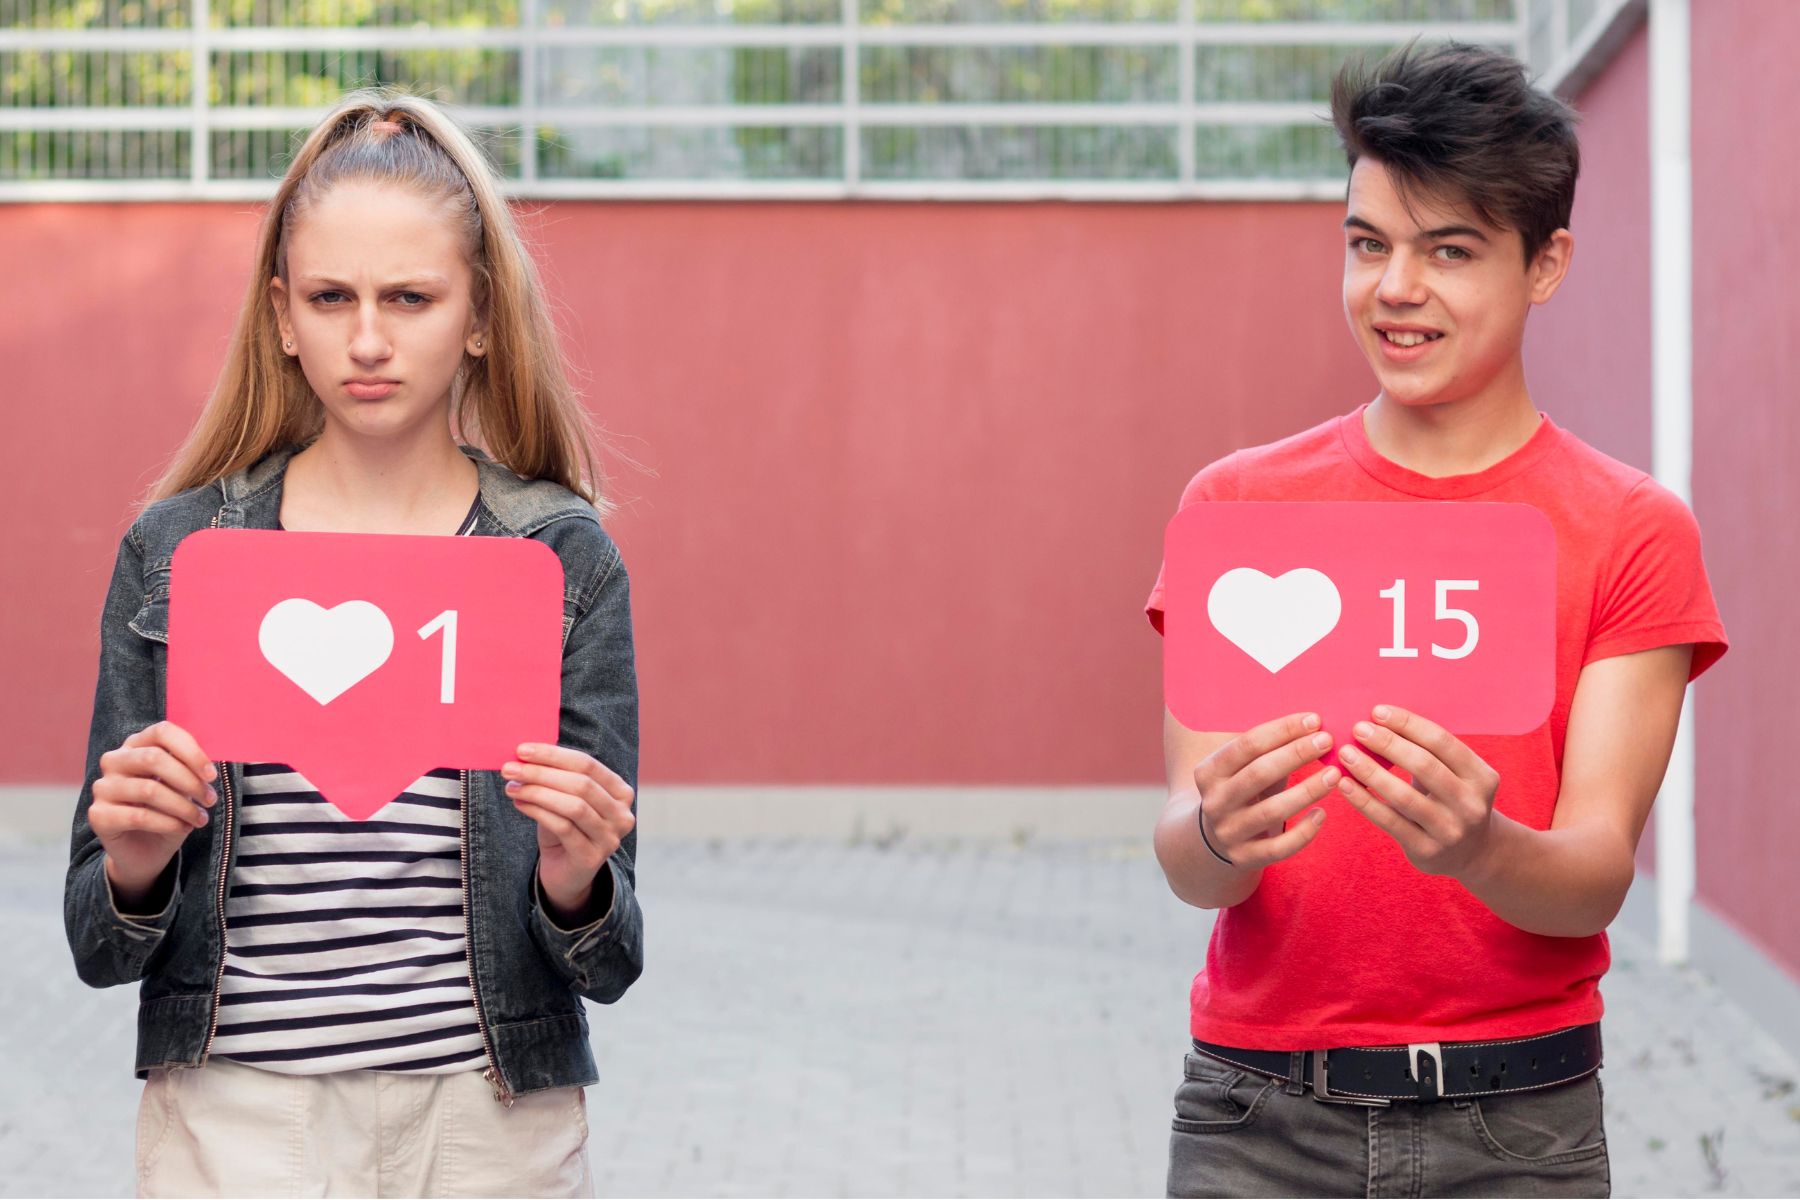 A young white woman with blond hair holds a pretend Instagram “like count” of 1 while a young white person with dark, short hair holds up a pretend Instagram “like count” of 15